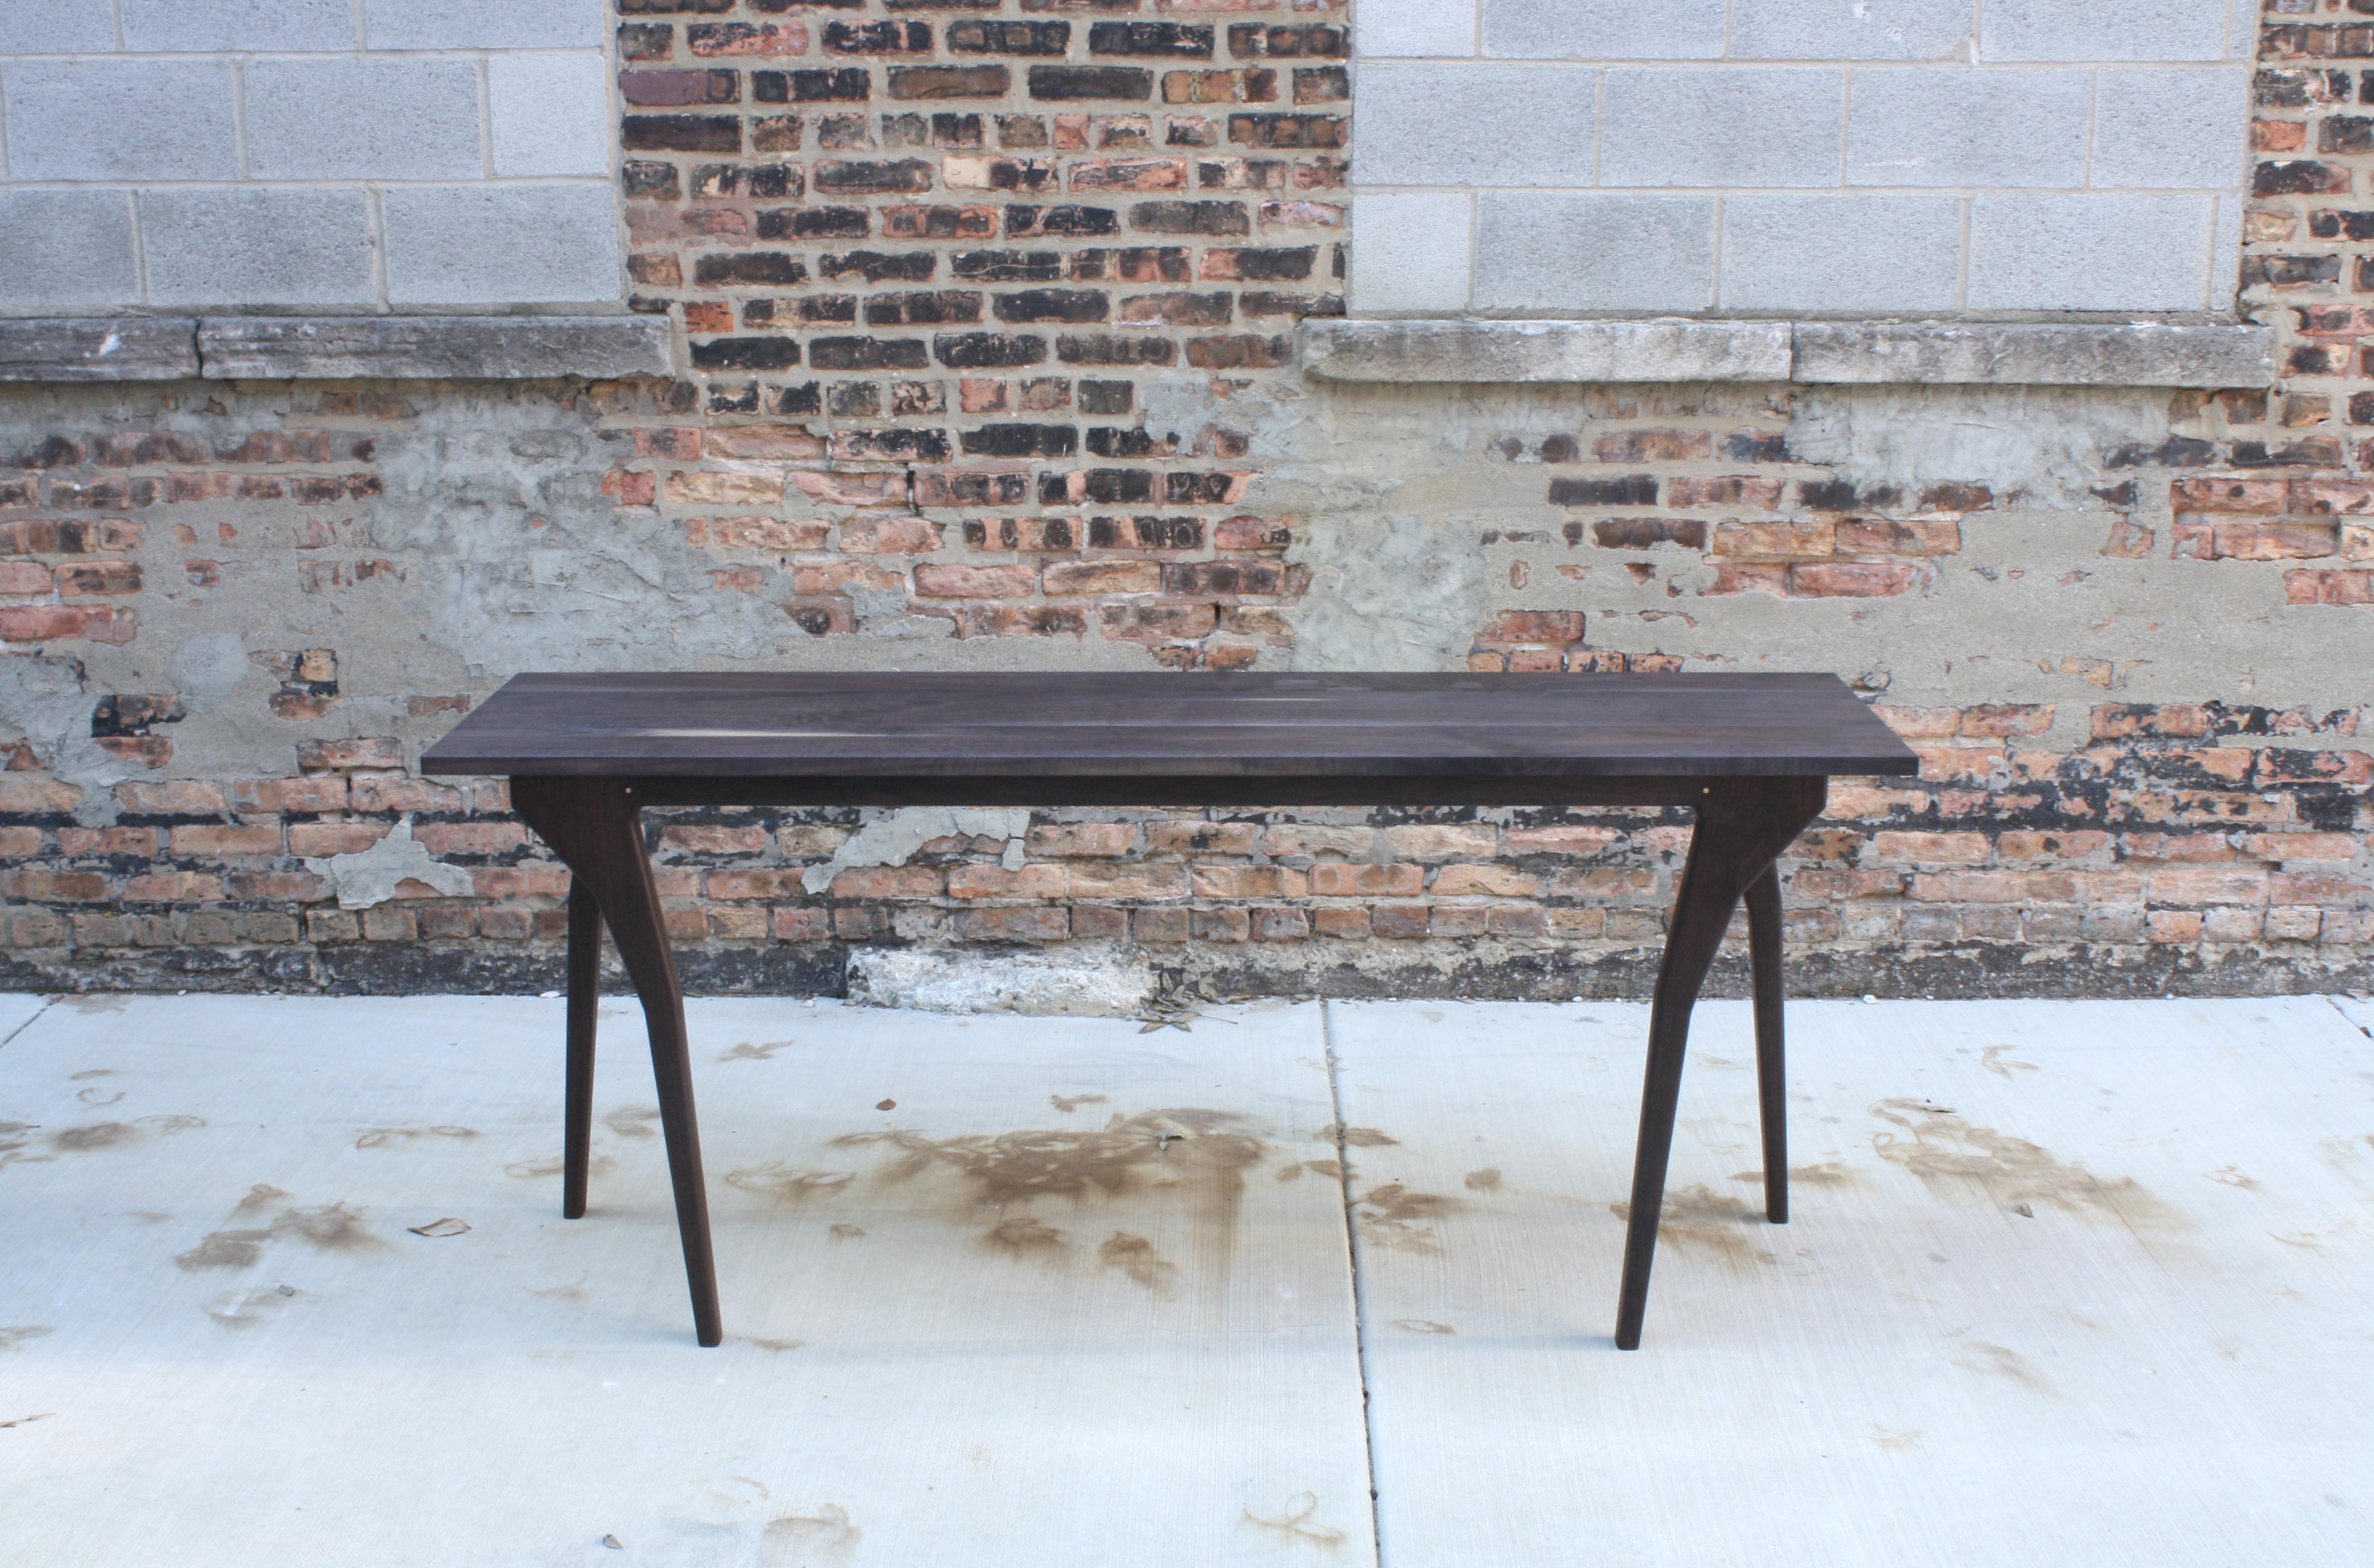 Handmade in Chicago by Laylo Studio, this personified table showcases proportion modeled after anatomy. The design of this piece is intended to mimic movement while maintaining an ultimately static pose. Constructed using brass pins to drawbore